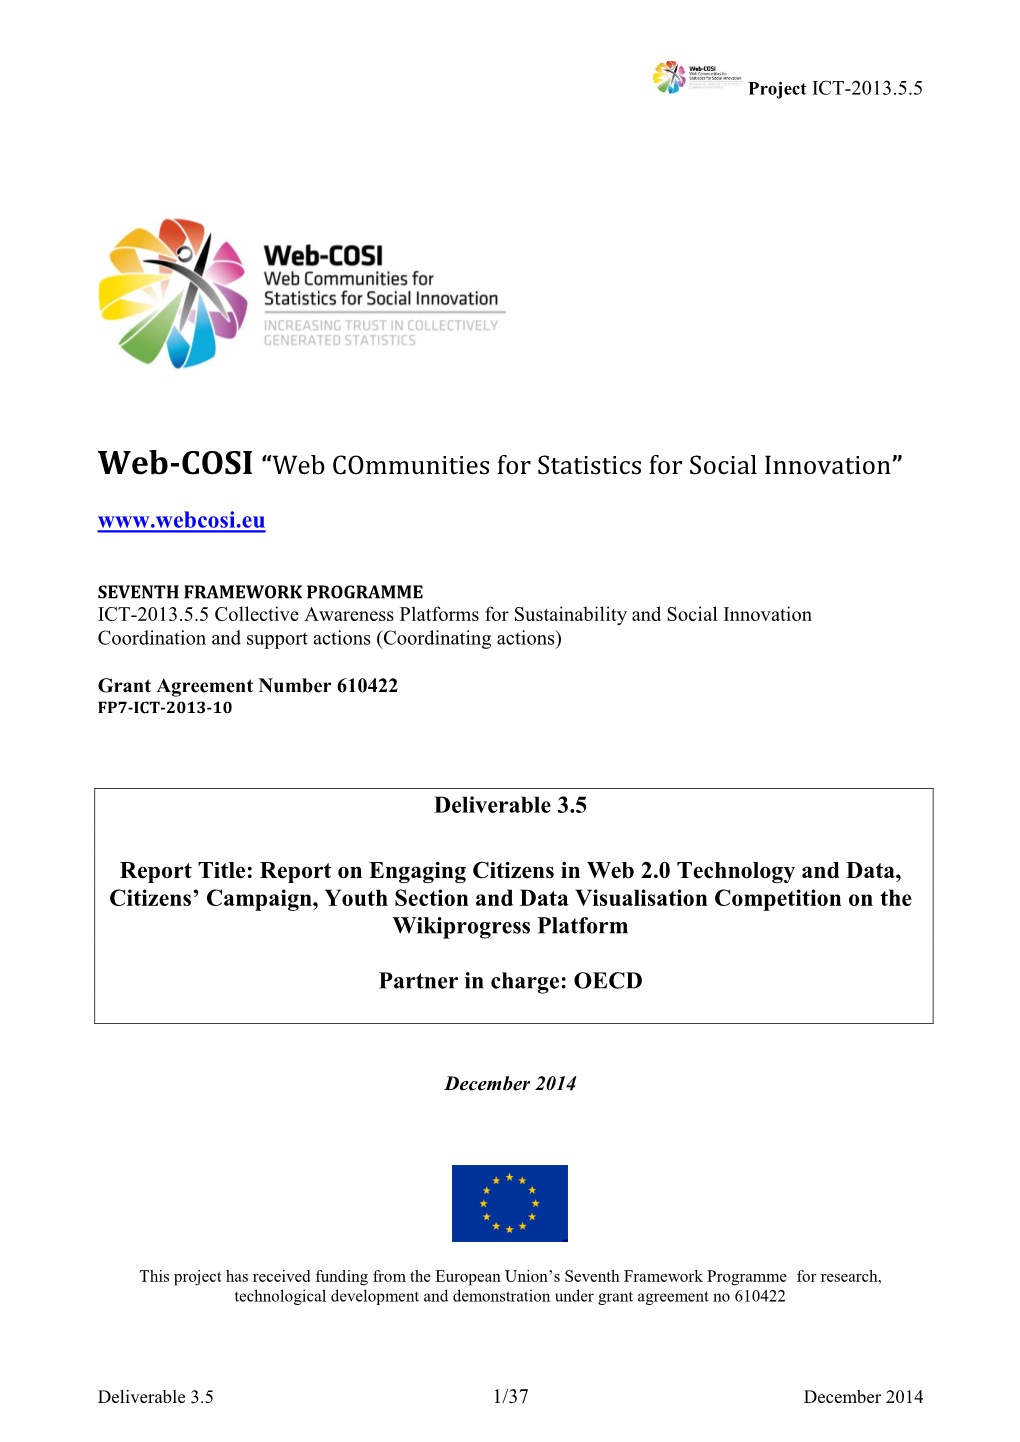 Web-COSI “Web Communities for Statistics for Social Innovation”